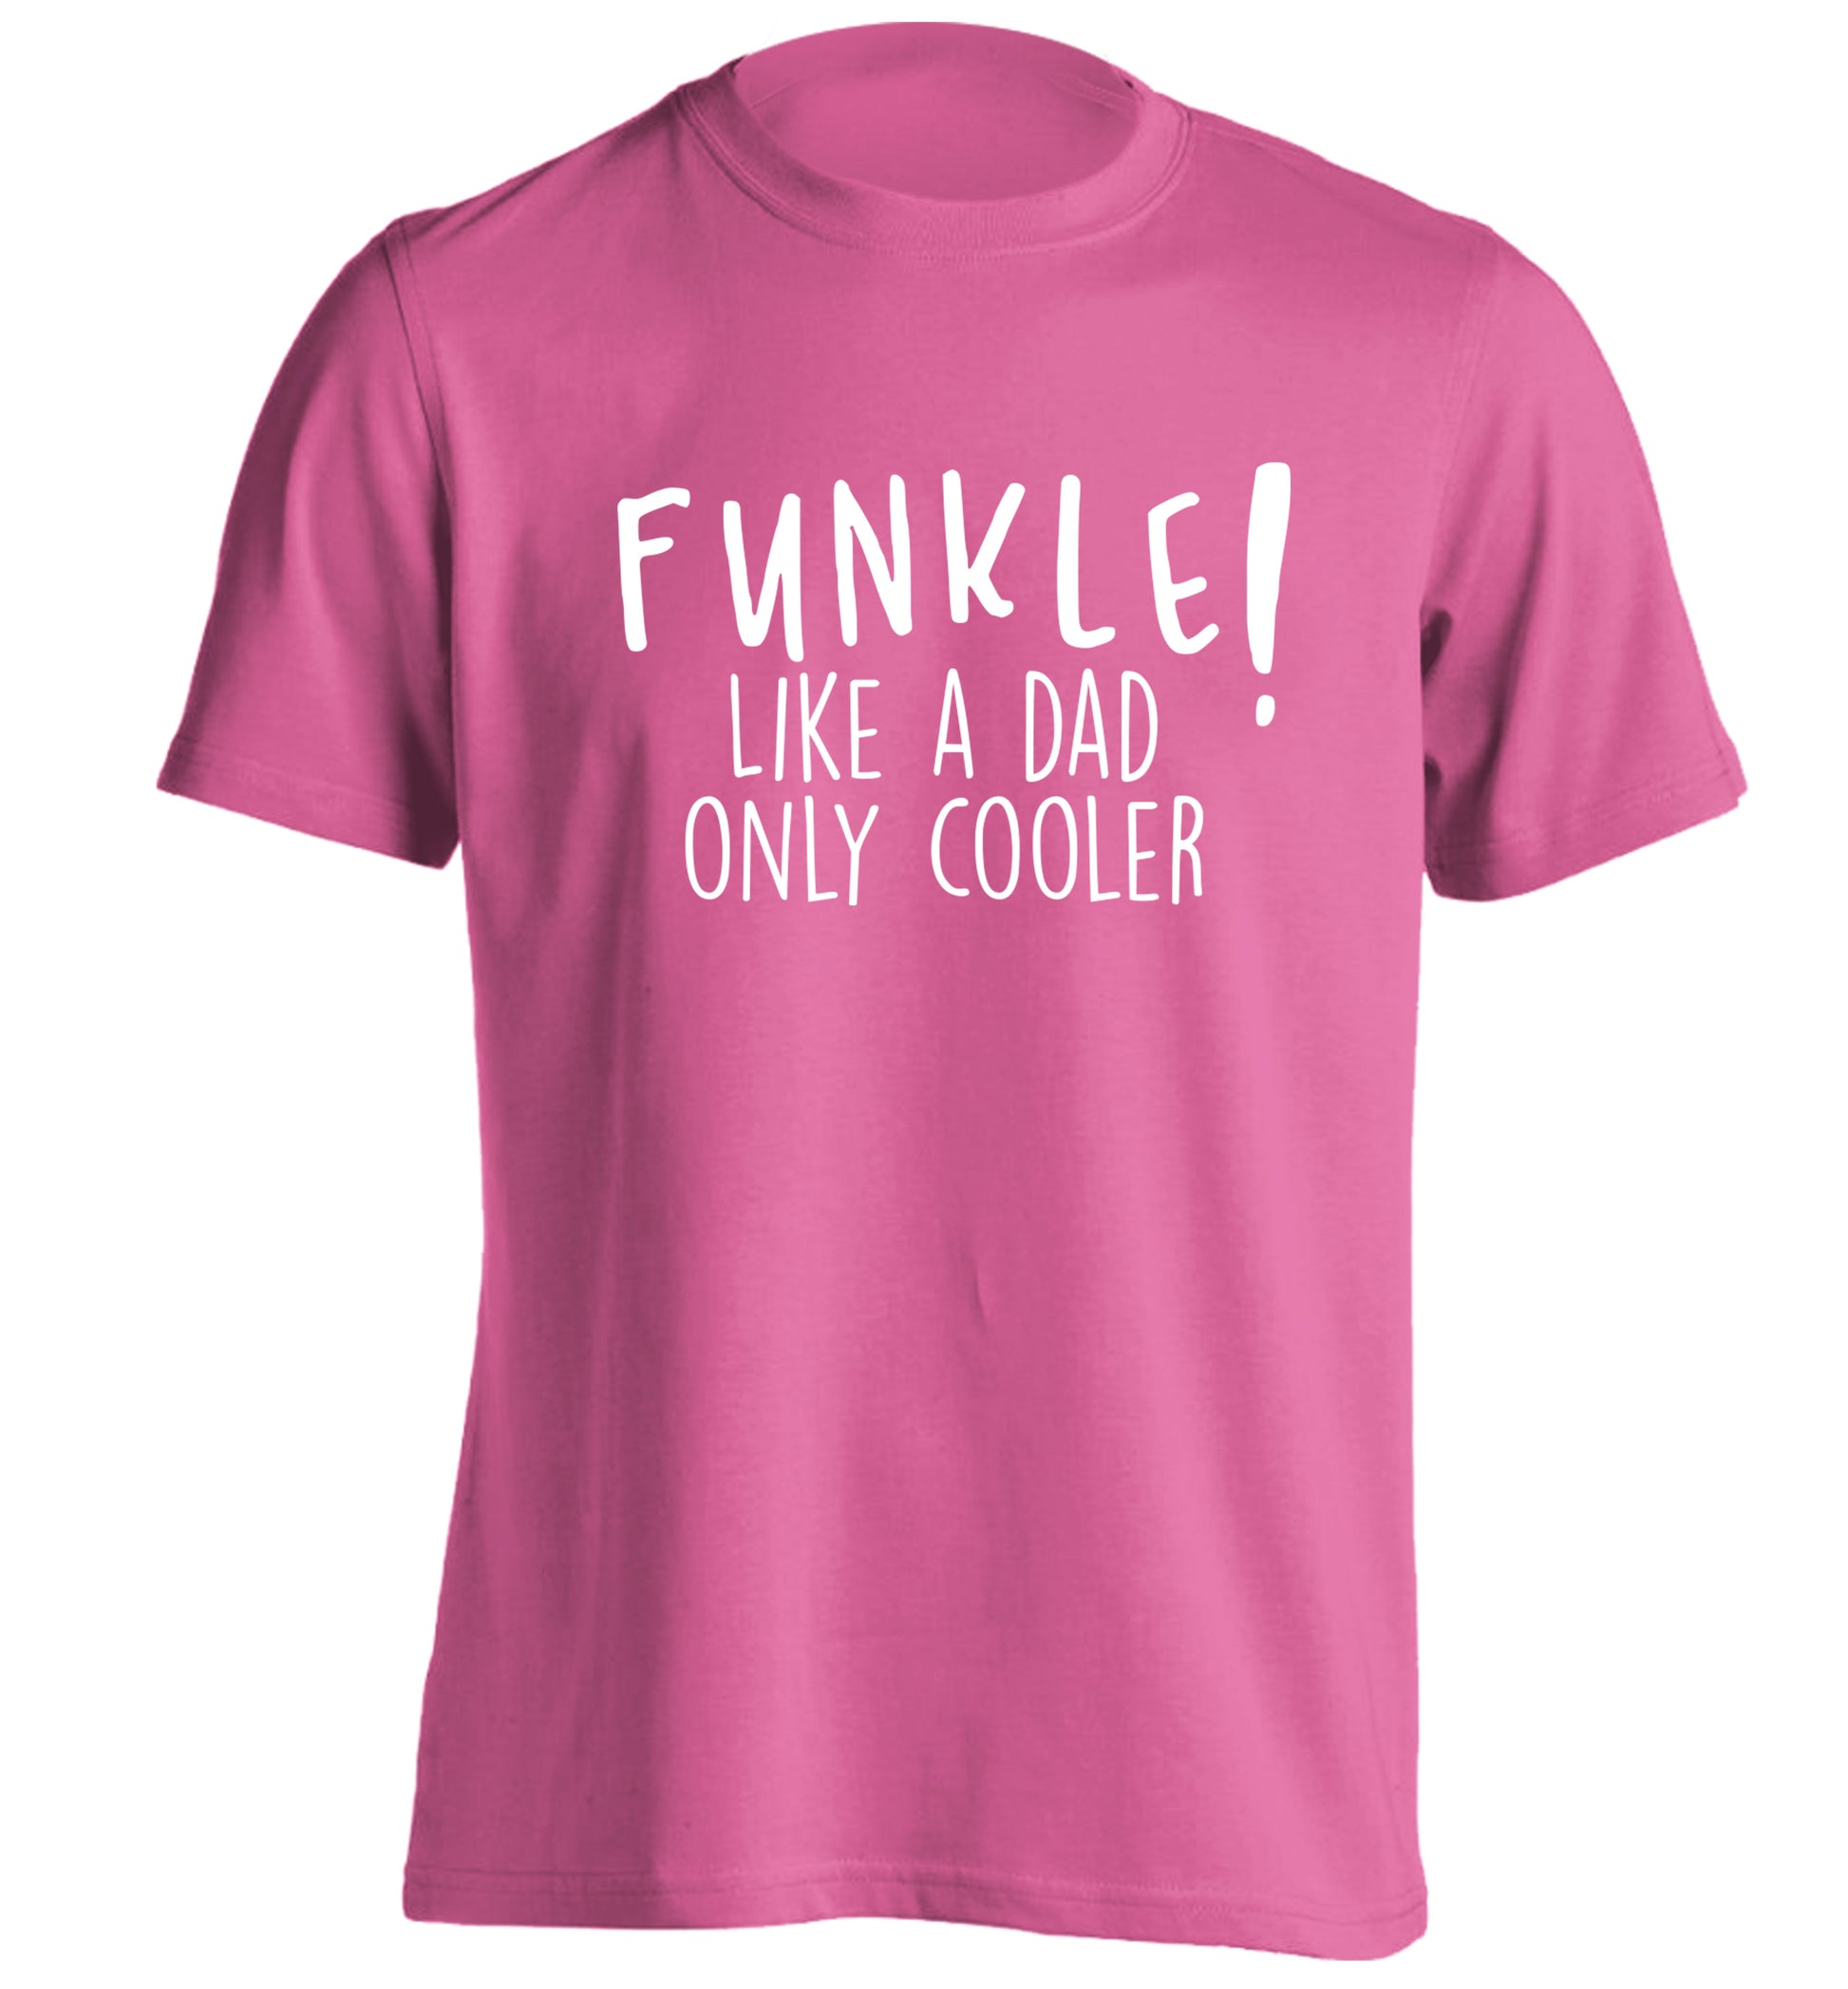 Funkle Like a Dad Only Cooler adults unisex pink Tshirt 2XL